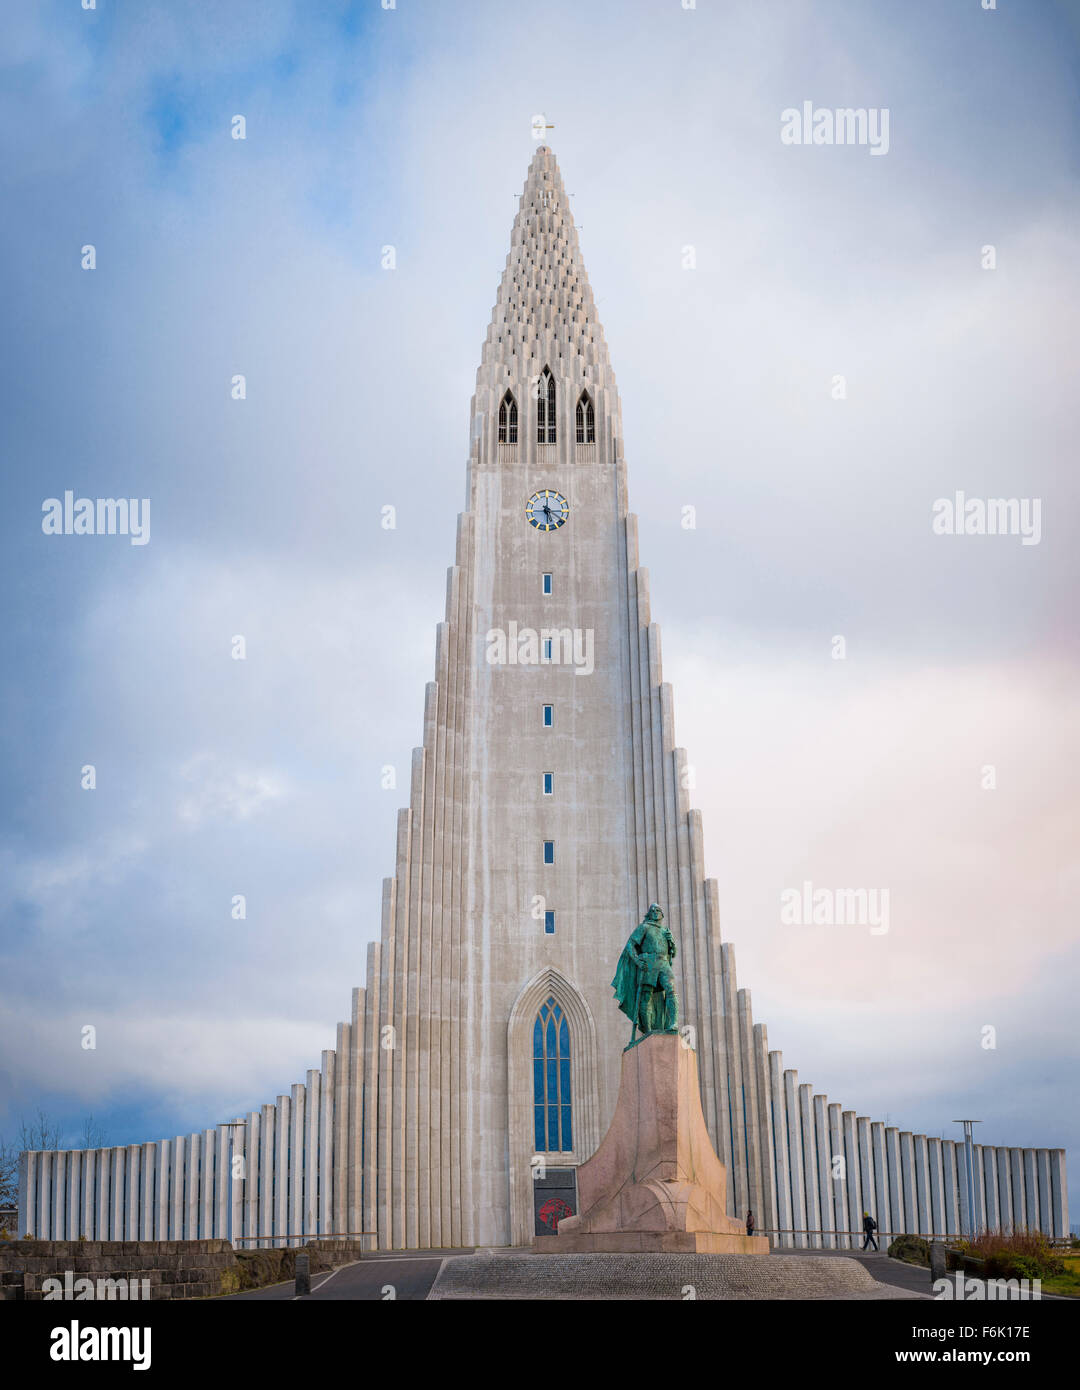 The iconic Hallgrimskirkja Church in Reykjavik, Iceland with the statue of Leifur Eiriksson in the foreground. Stock Photo